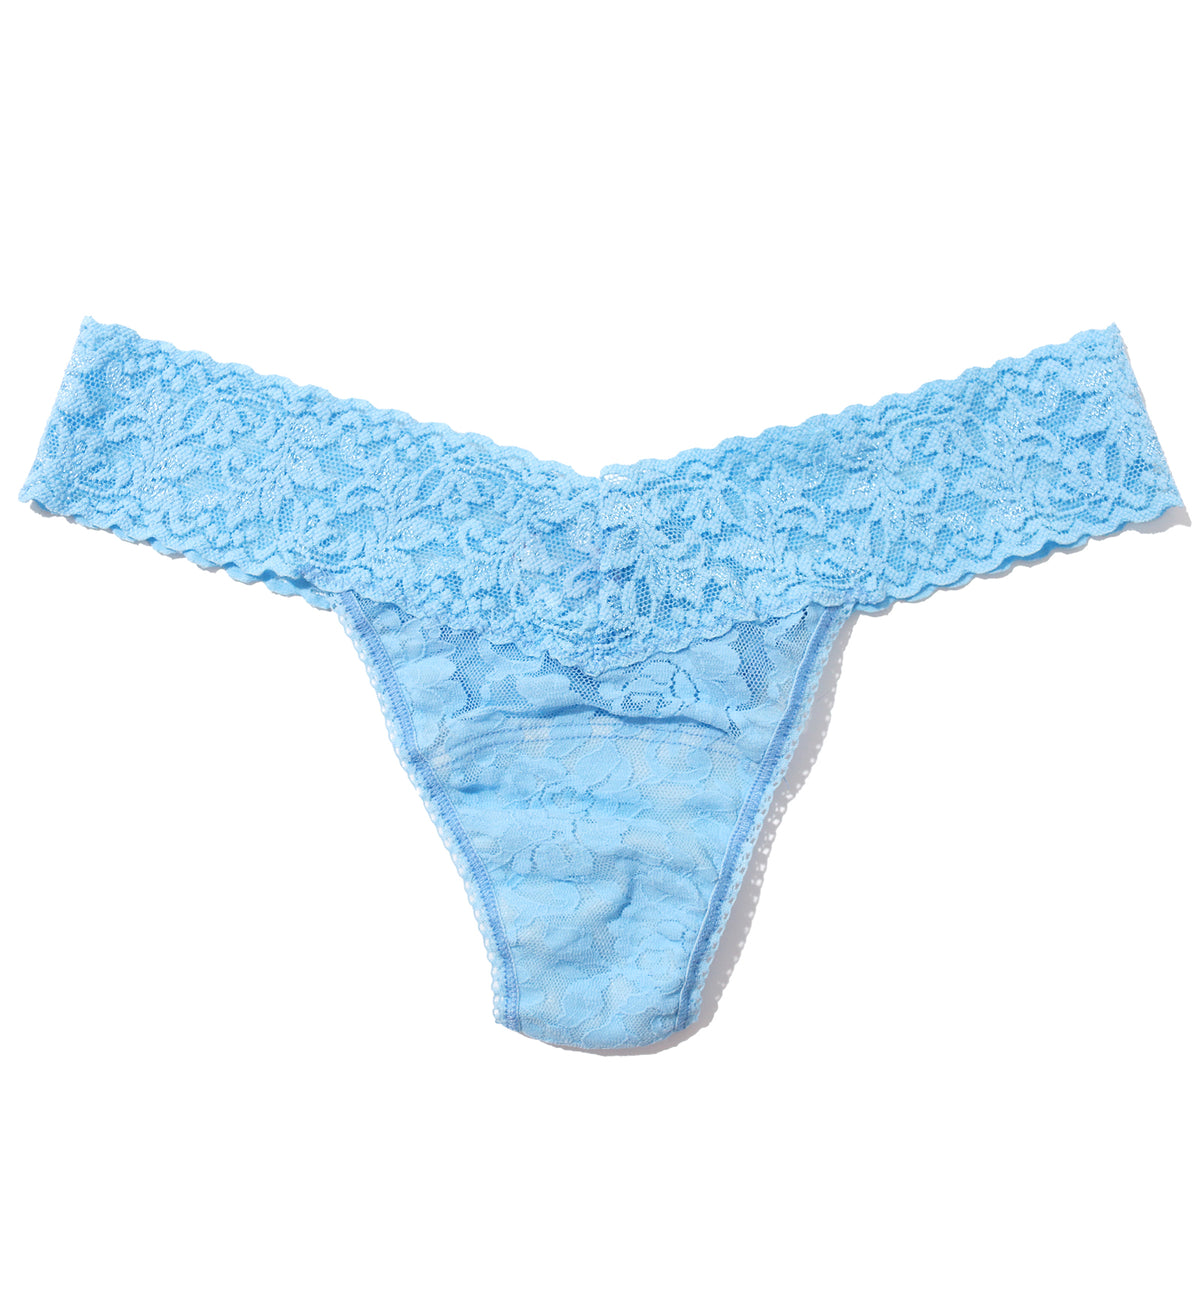 Hanky Panky Signature Lace Low Rise Thong (4911P),Partly Cloudy - Partly Cloudy,One Size